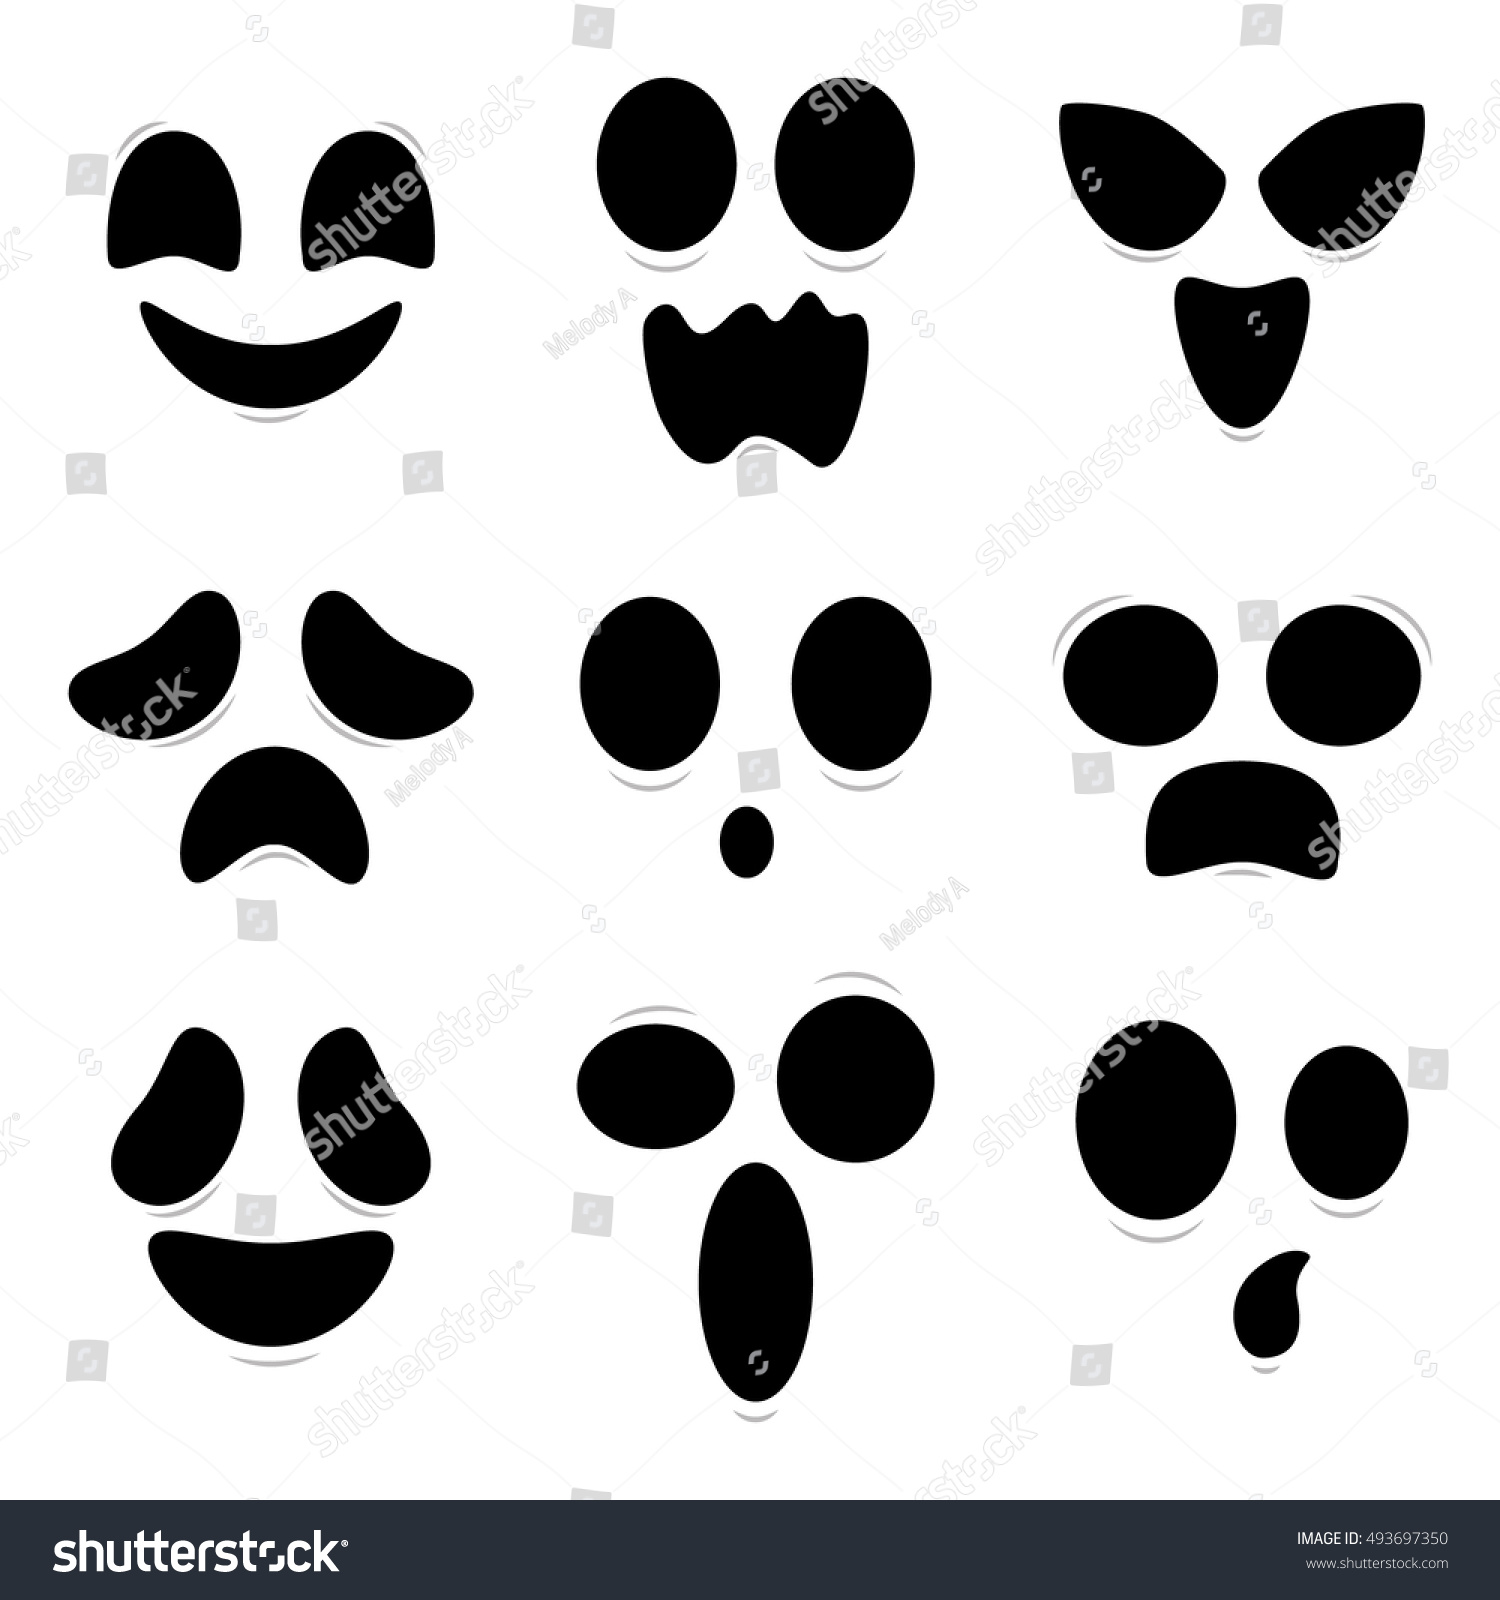 Silhouette Ghost Faces Stock Vector 493697350 - Shutterstock